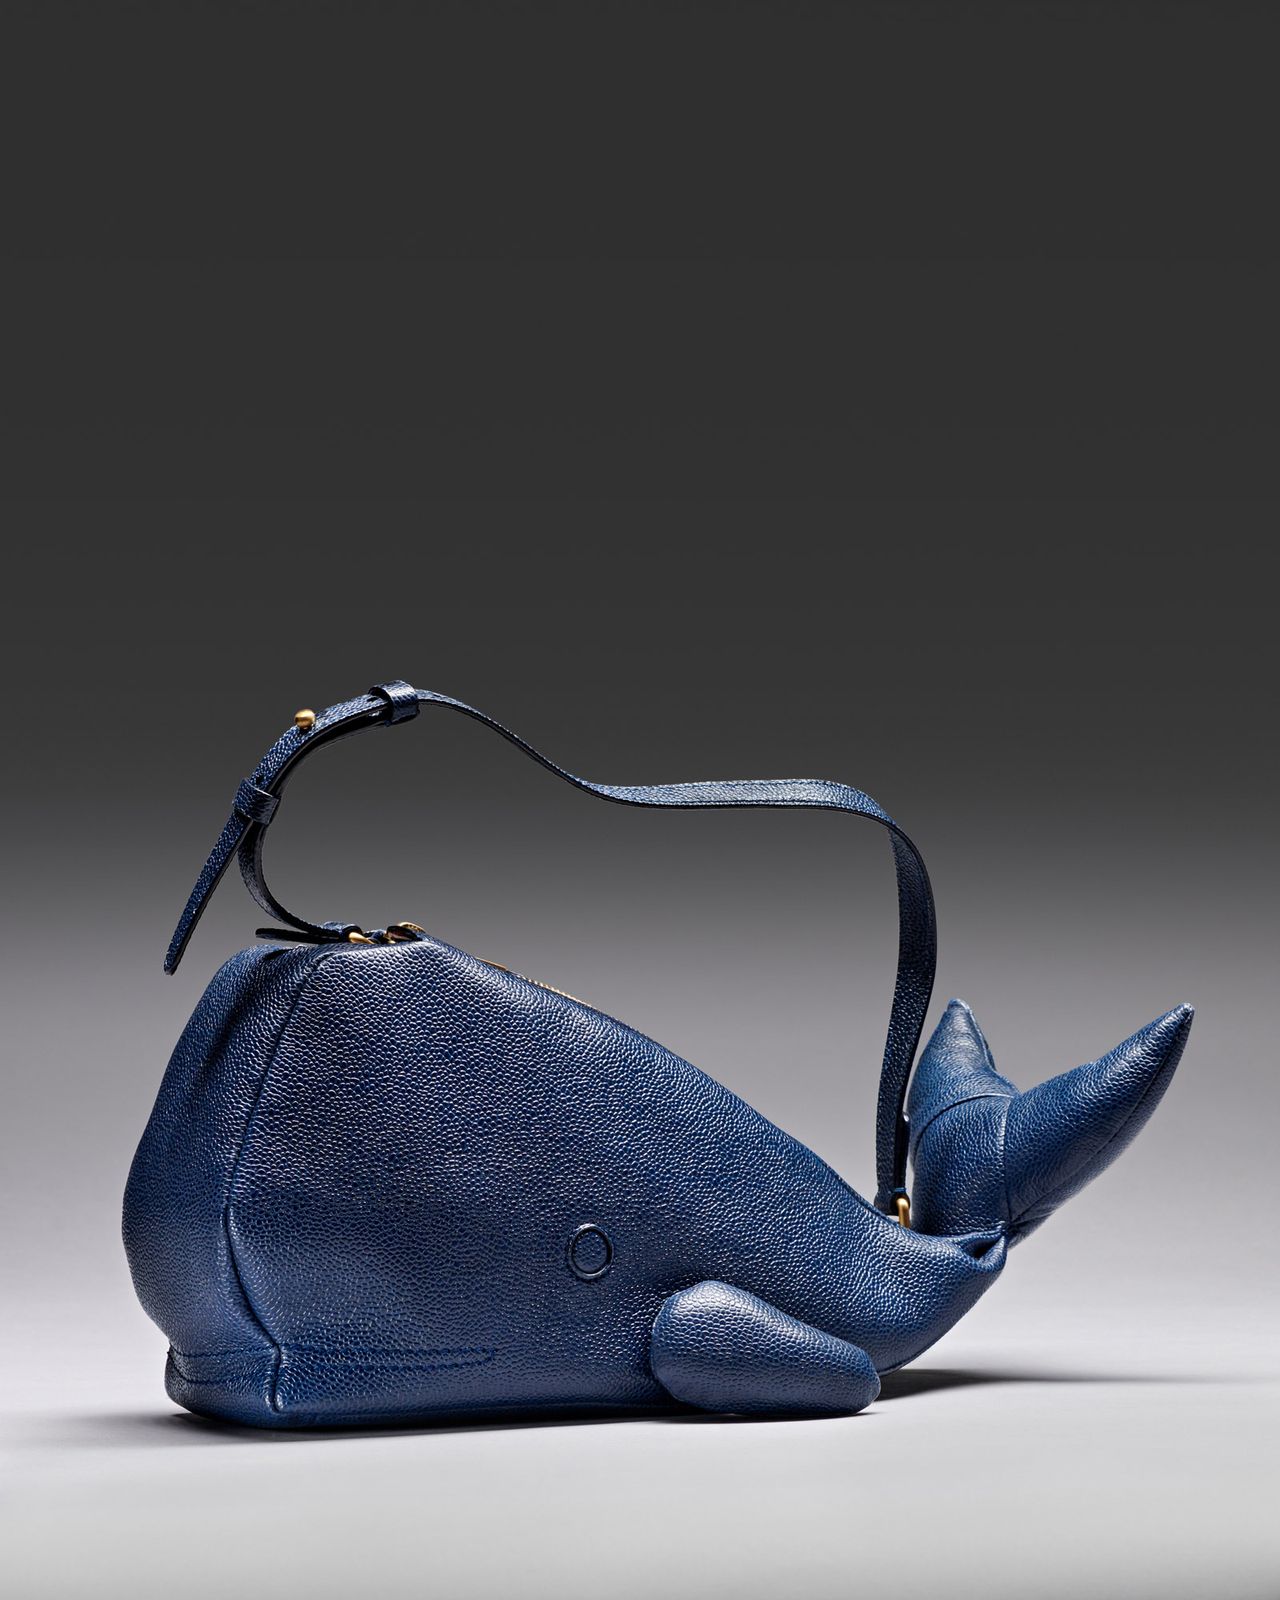 Thom Browne’s whale-shaped bag is inspired by Moby Dick | Wallpaper